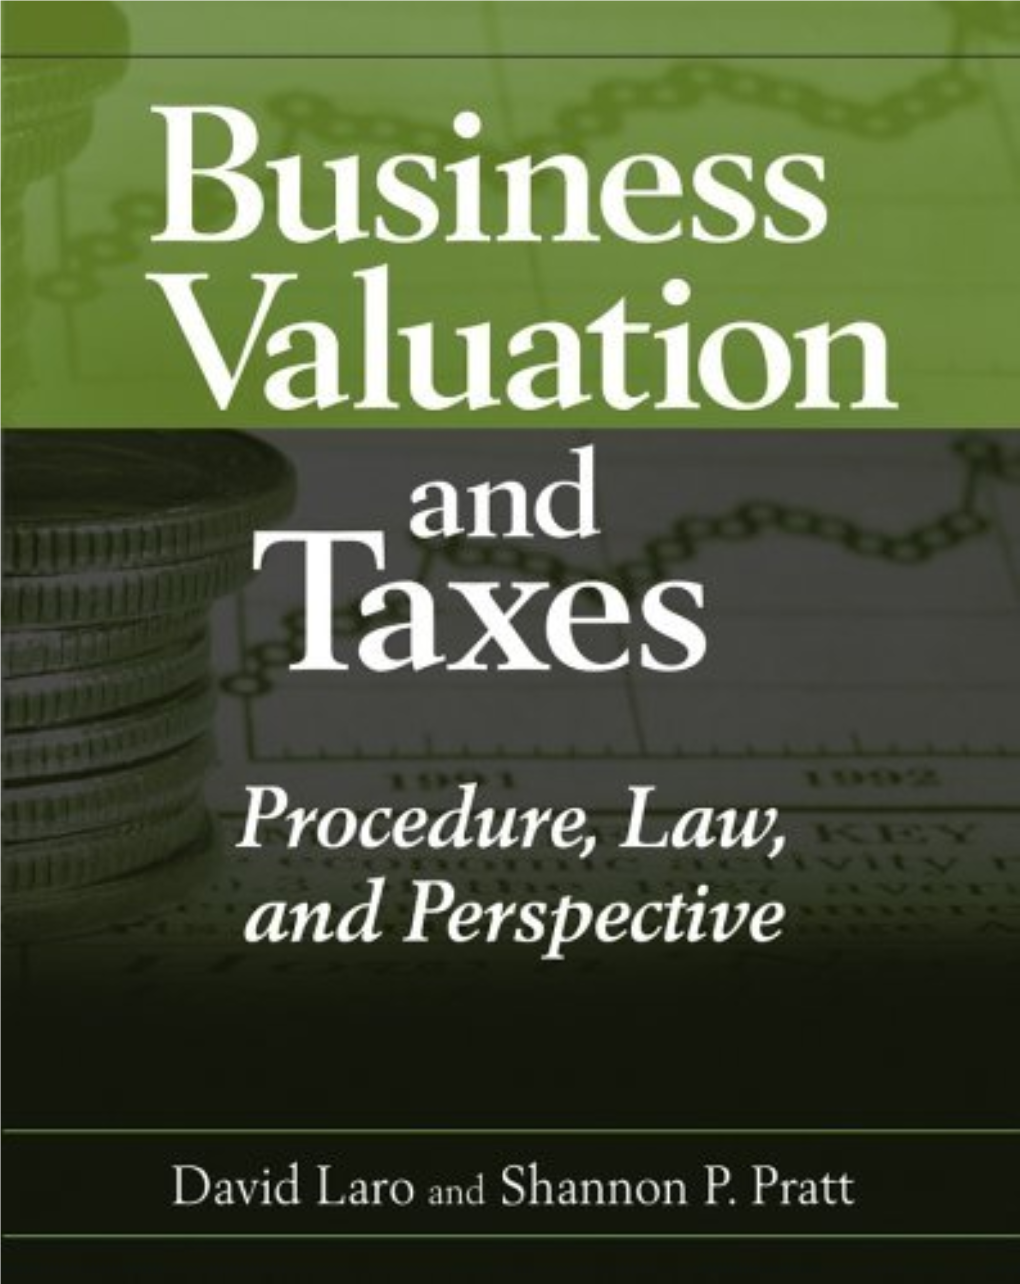 Business Valuation and Taxes Procedure, Law, and Perspective